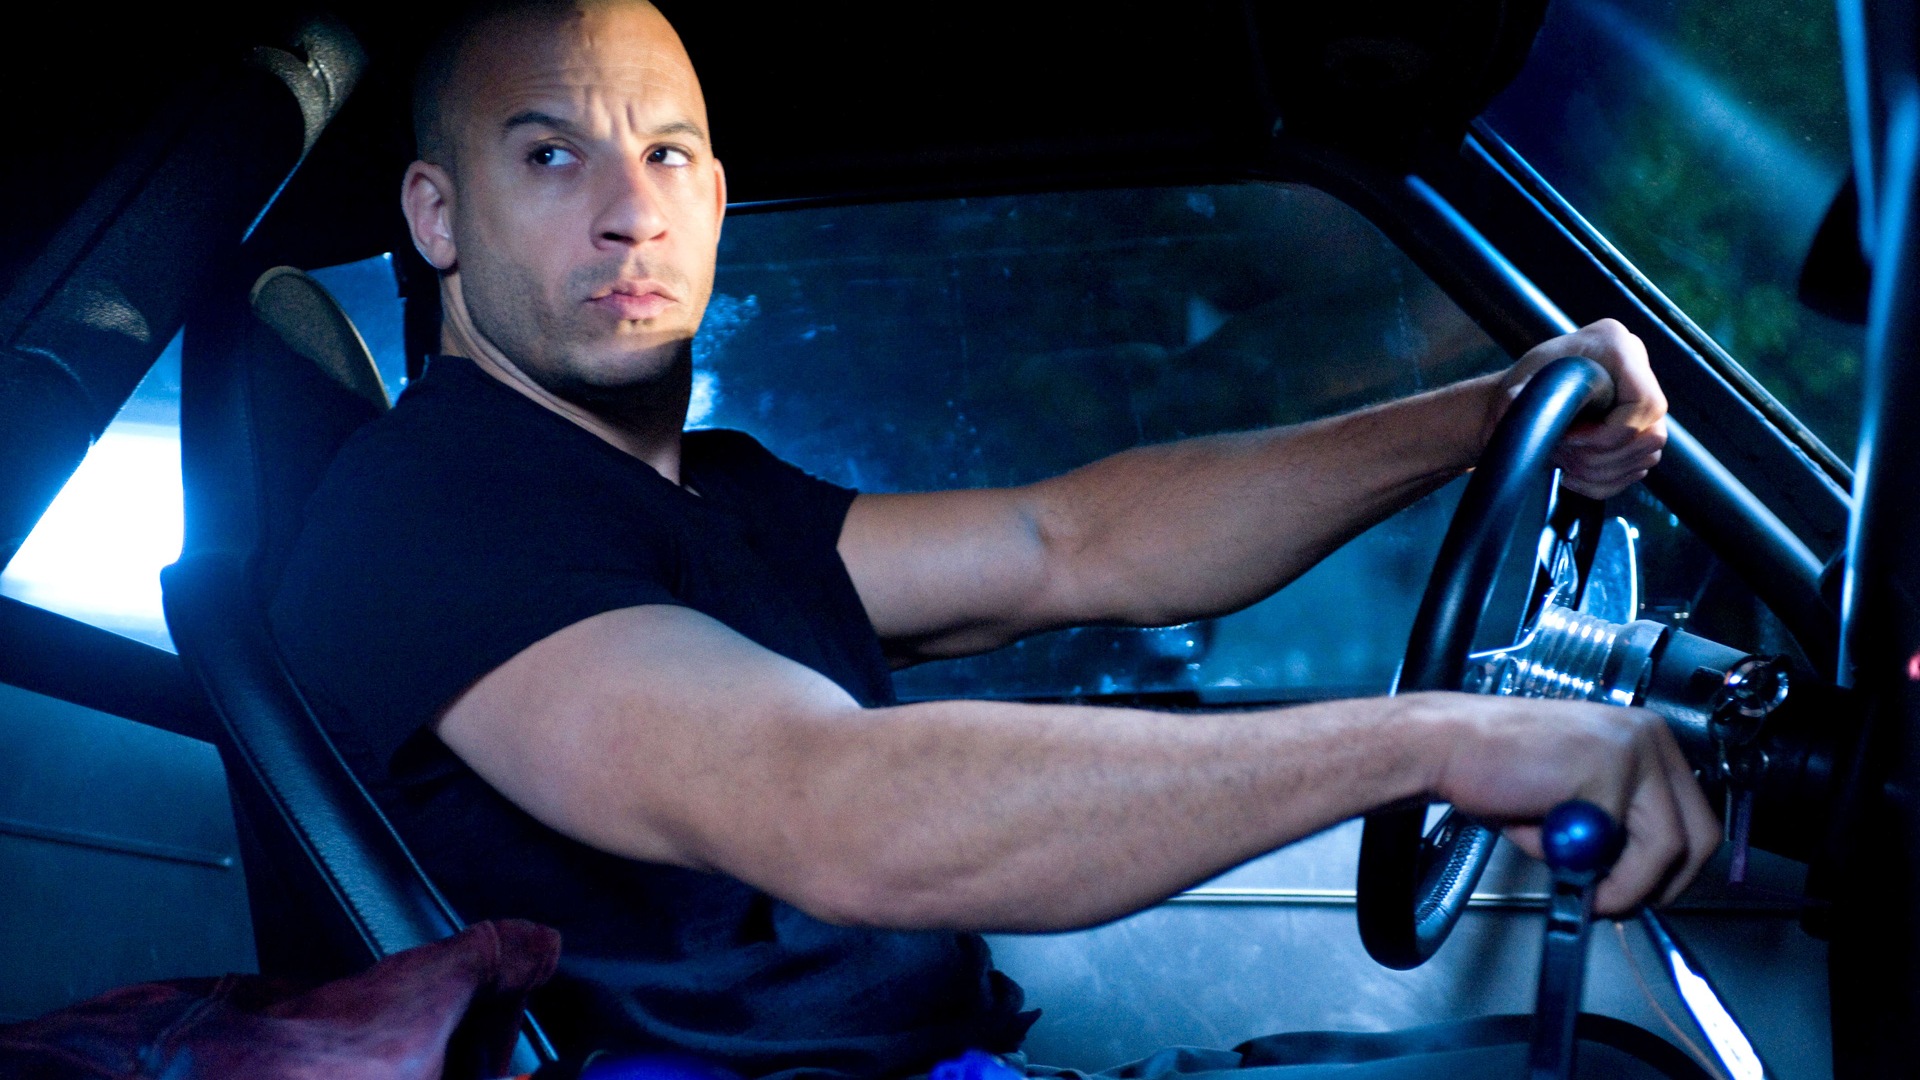 Fast And Furious 6 HD movie wallpapers #7 - 1920x1080